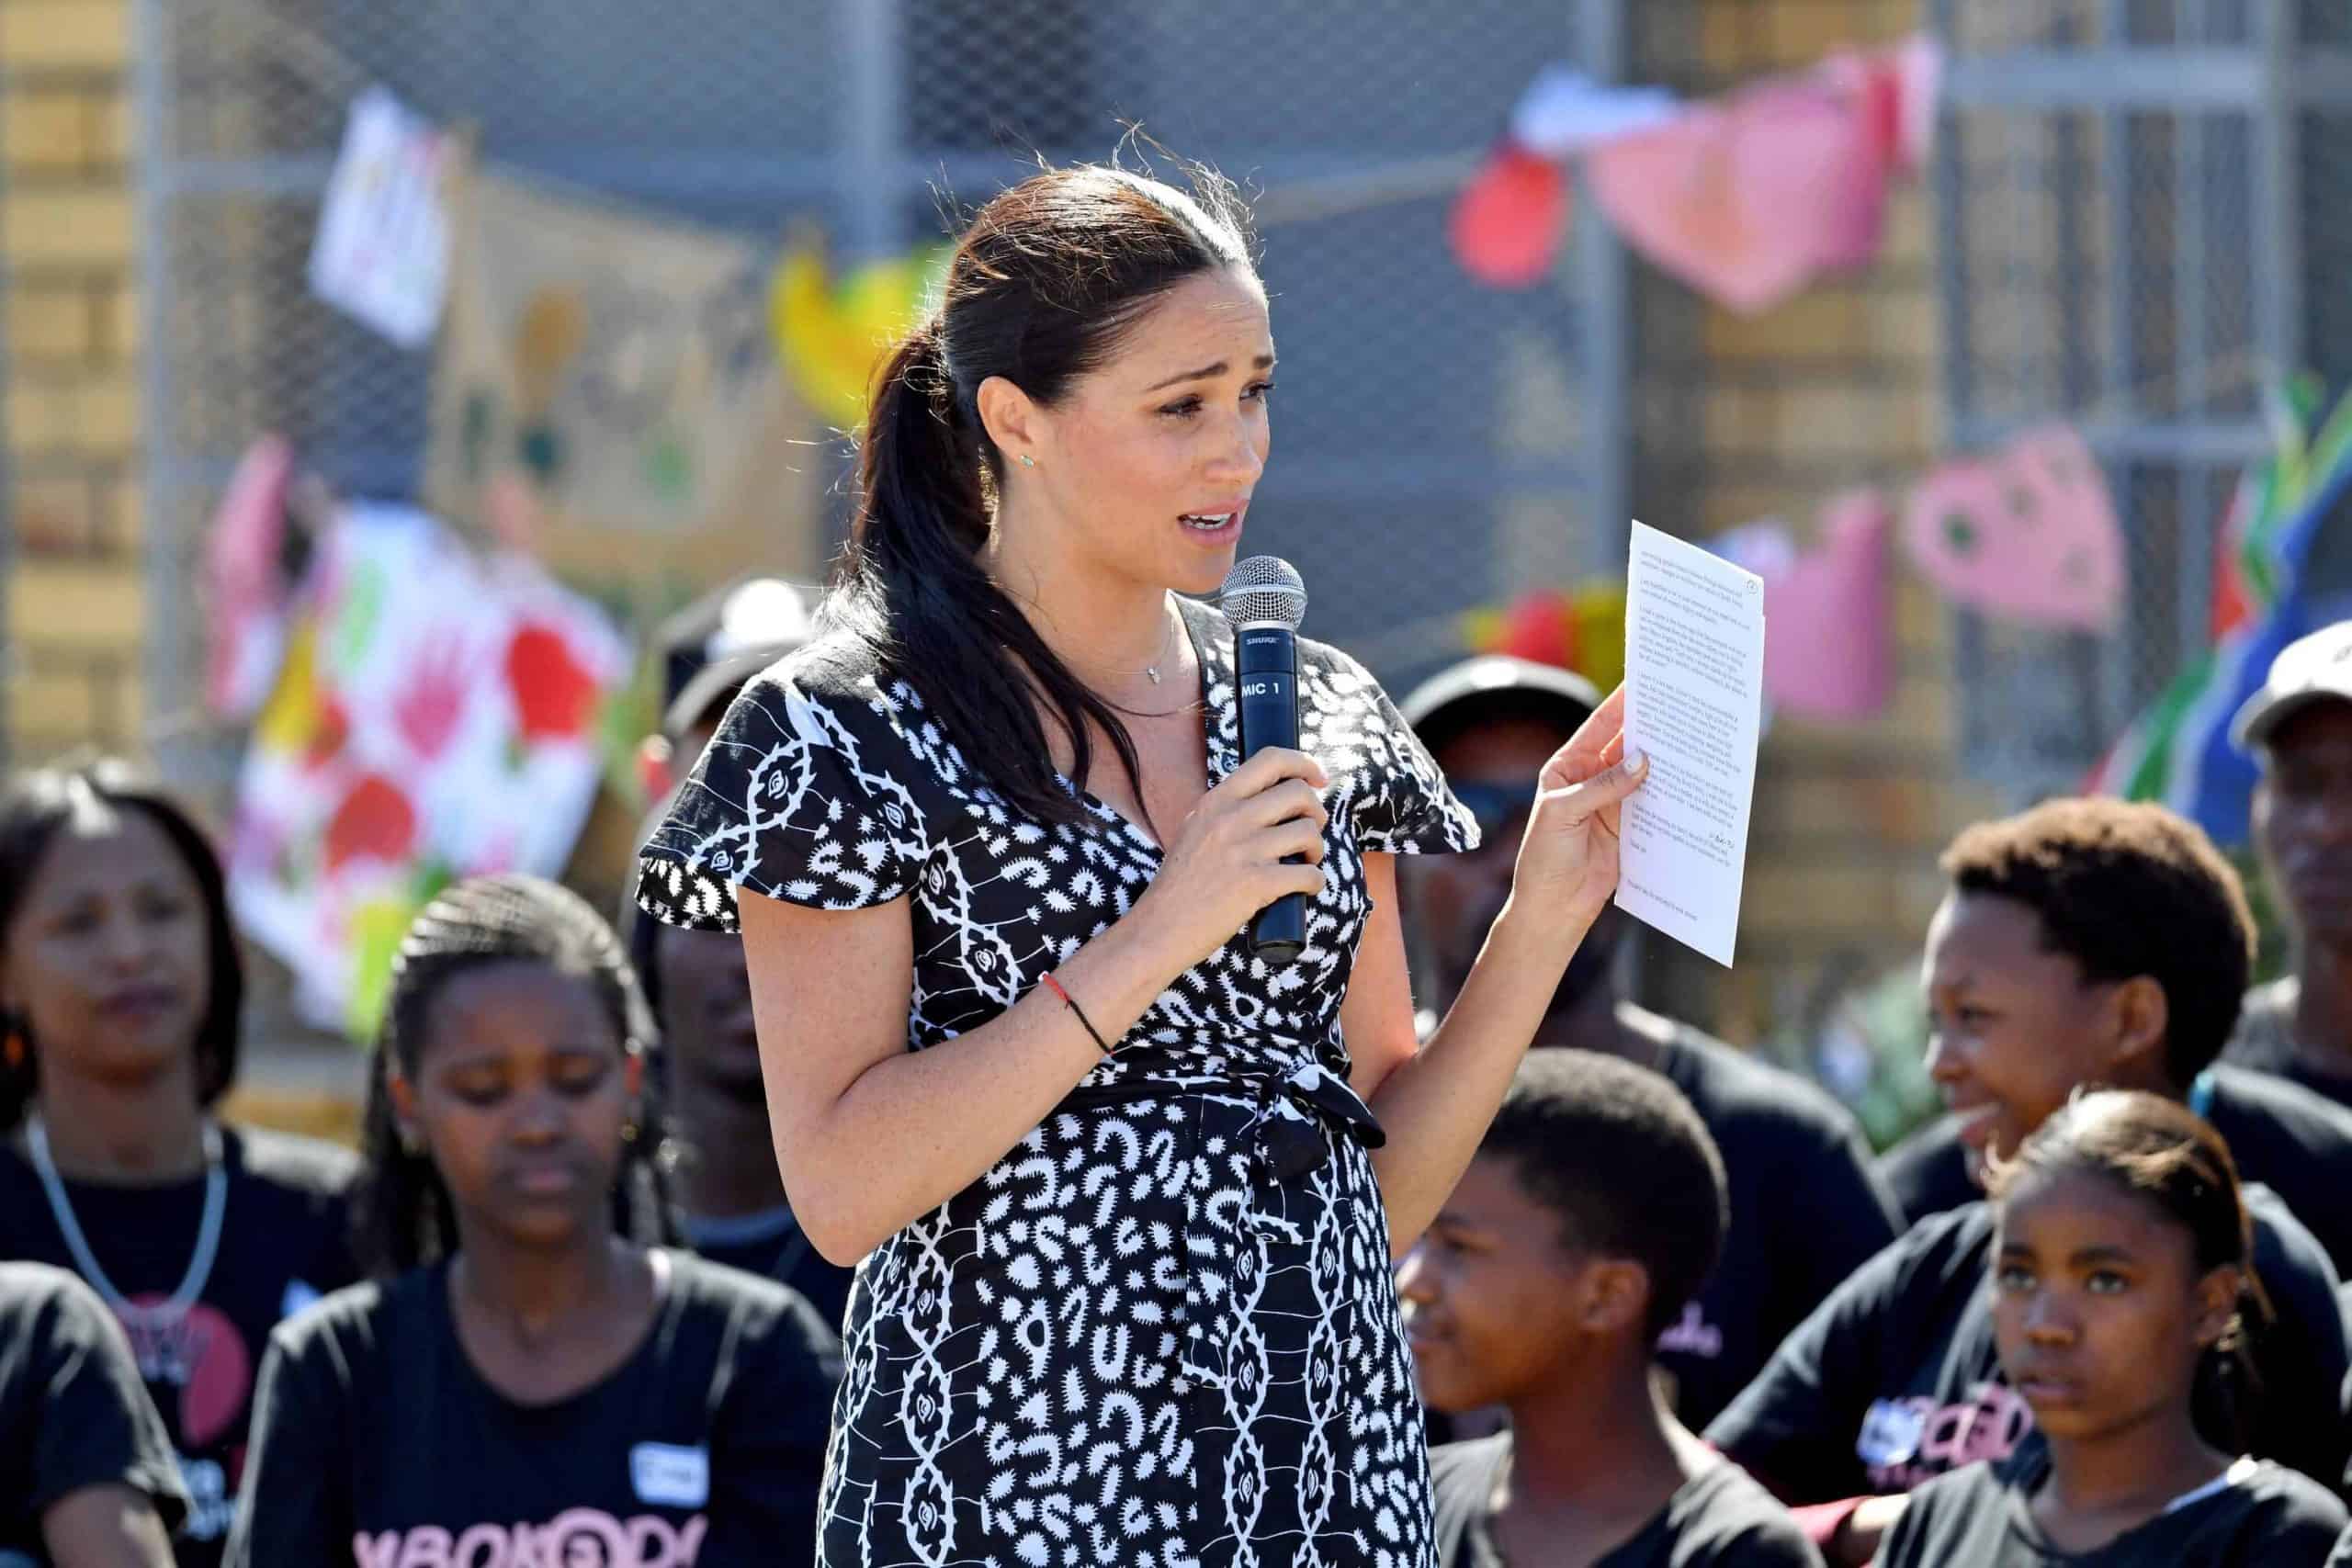 Watch Meghan speaks publicly about her mixed race heritage during South Africa tour